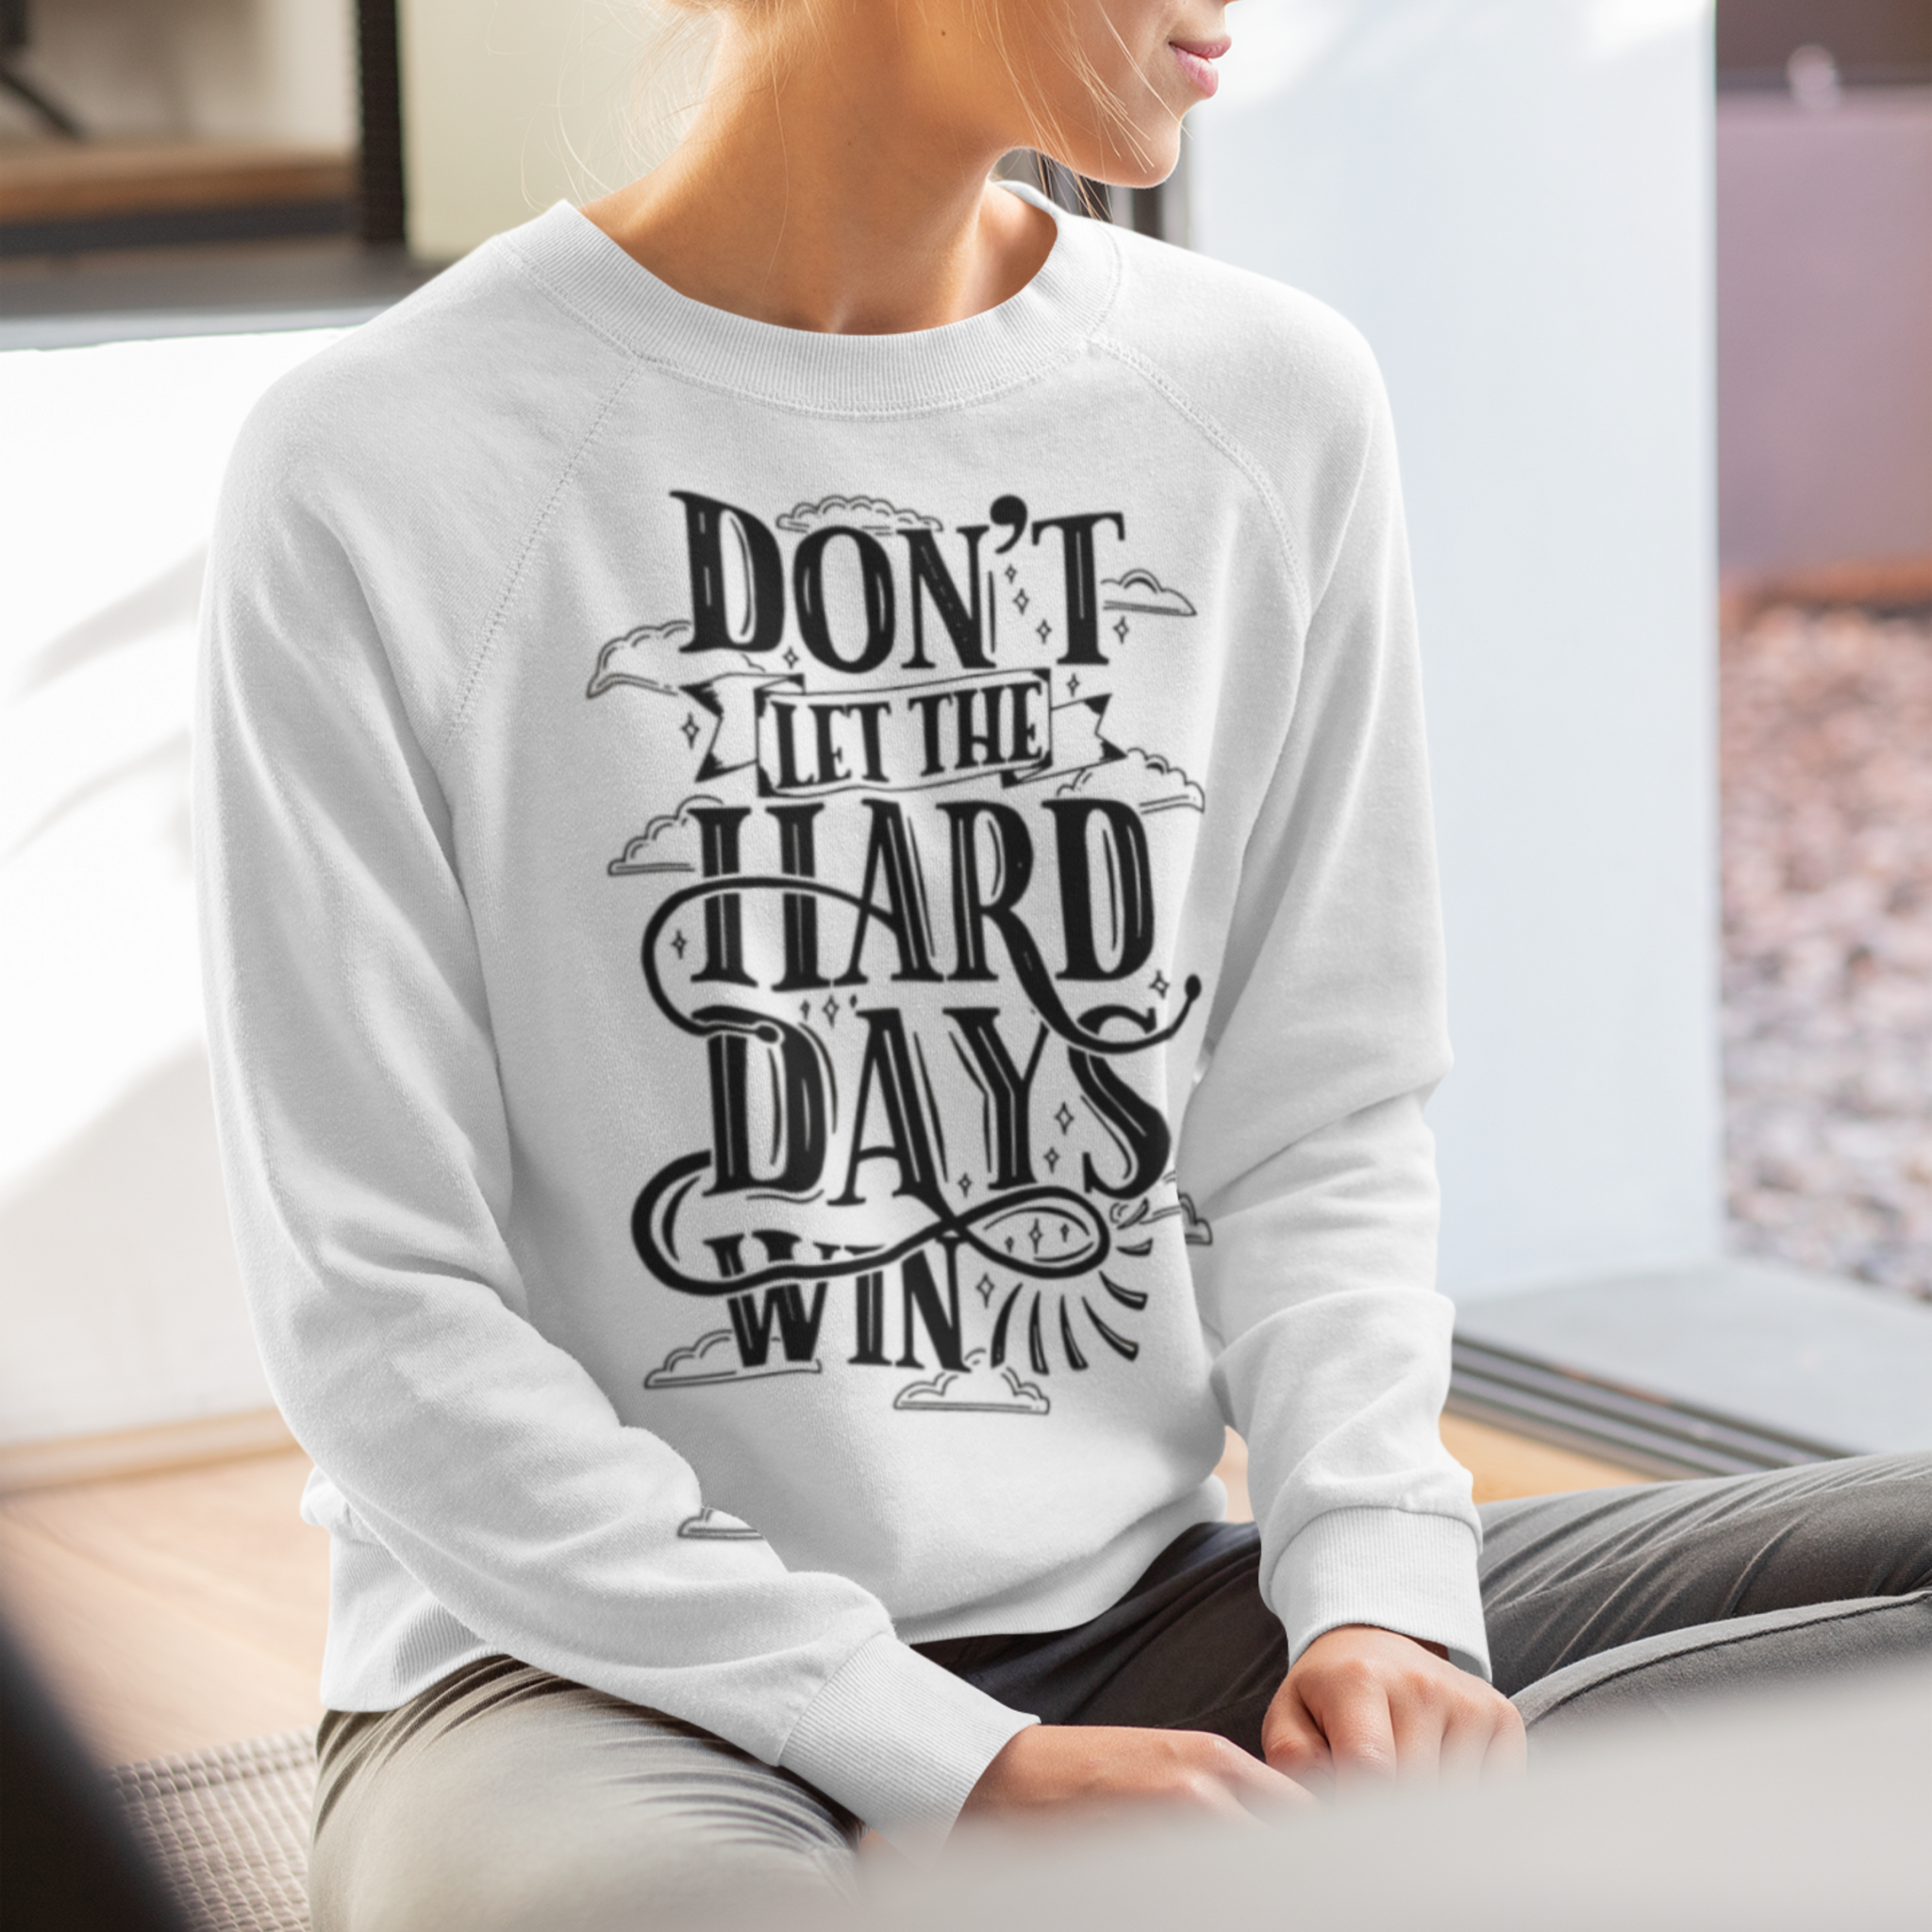 Don't let the hard days win - Sweatshirt - Maas - Acotar - Off Books Know No Age